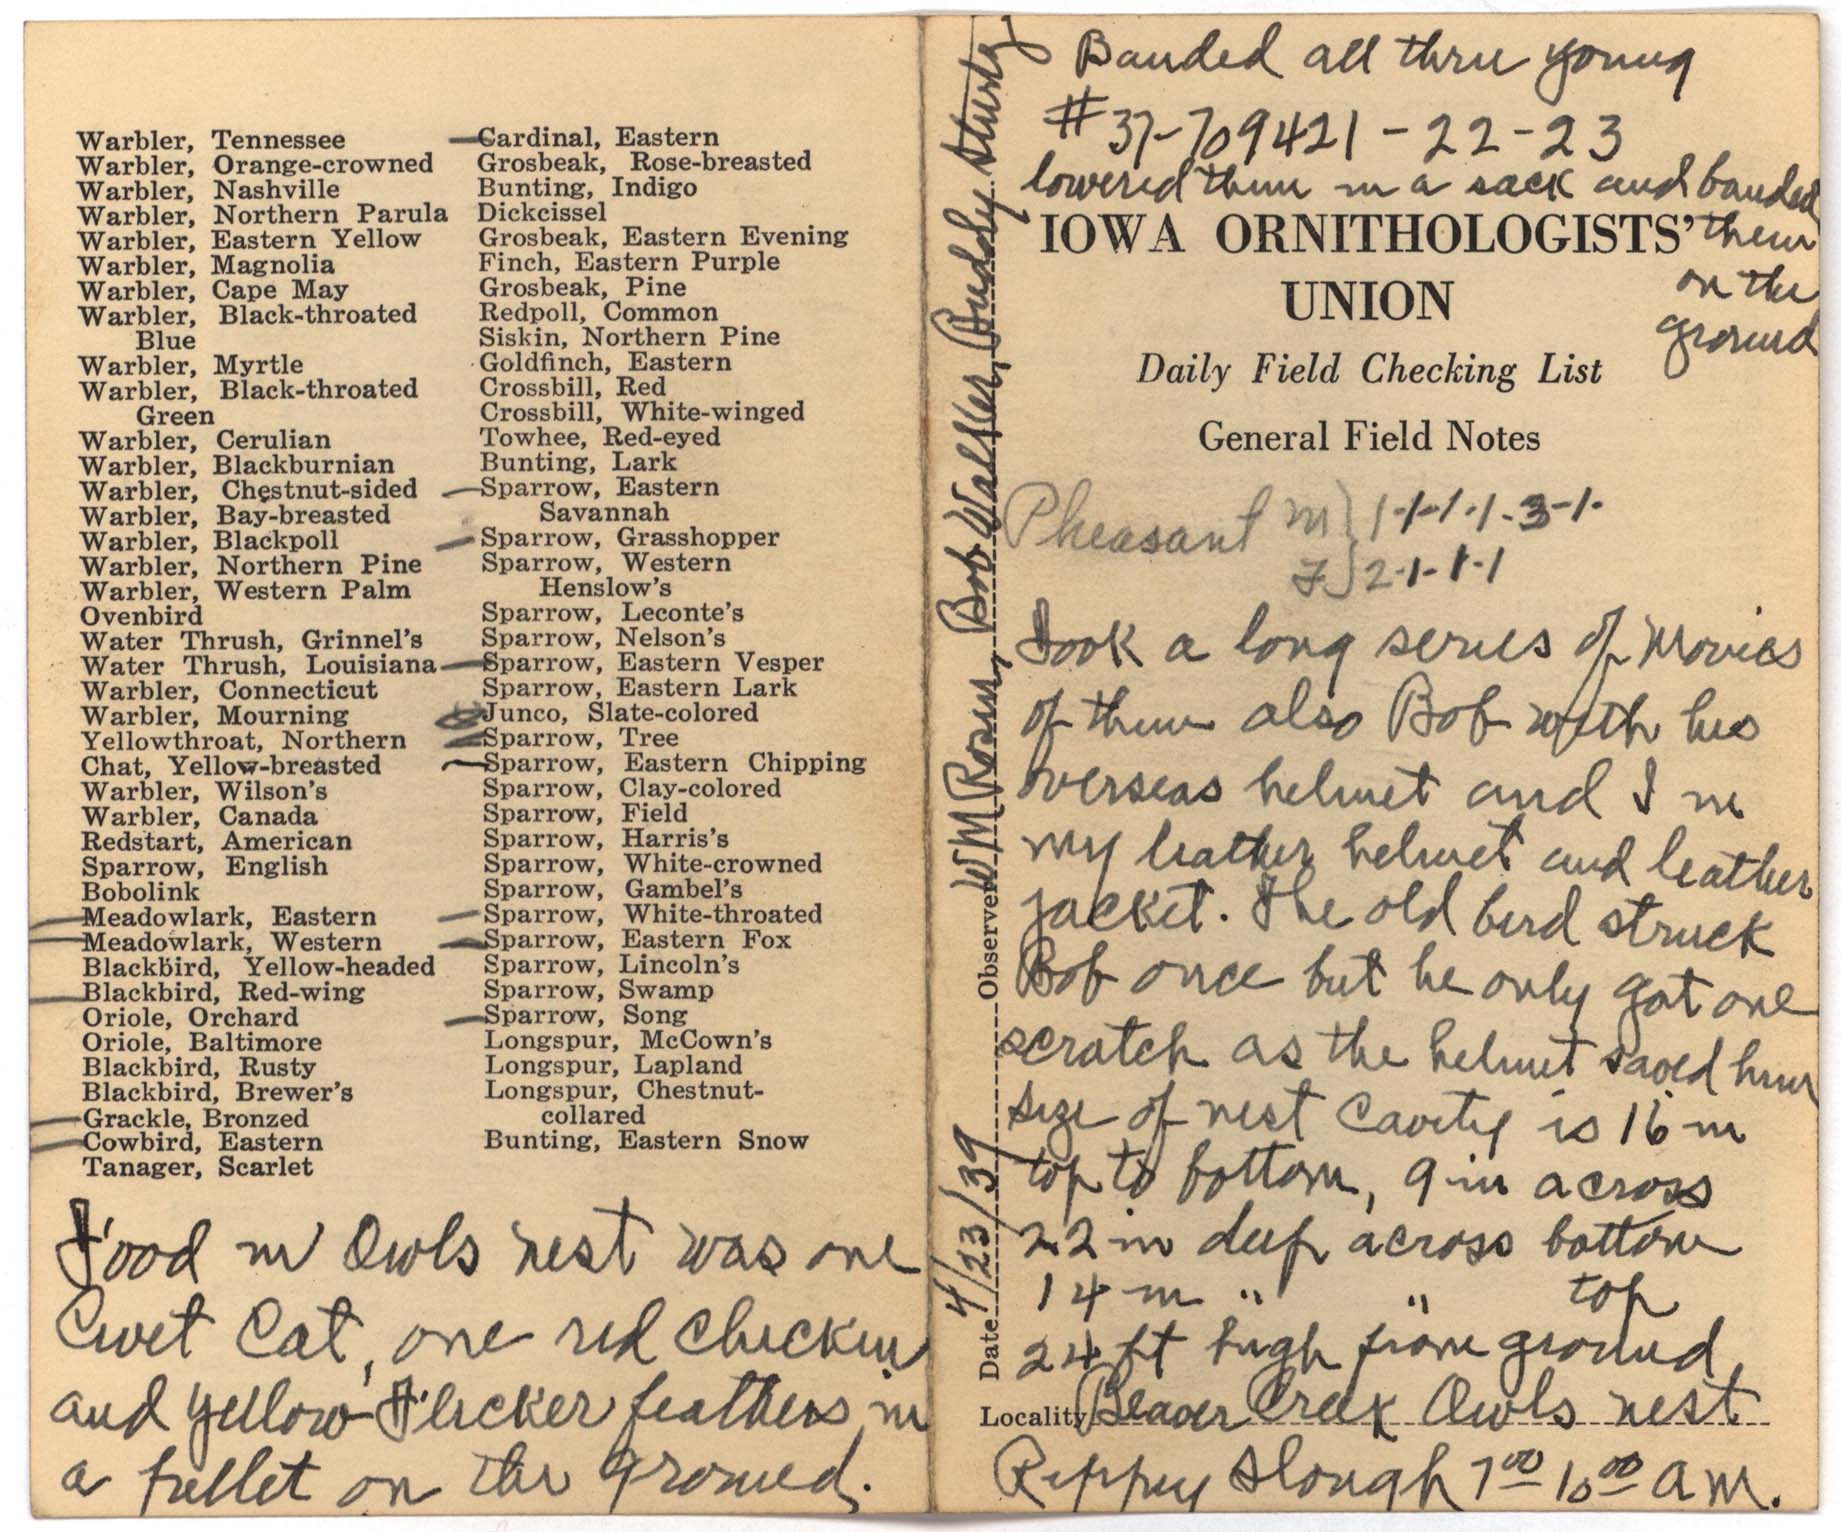 Daily field checking list by Walter Rosene, April 23, 1939